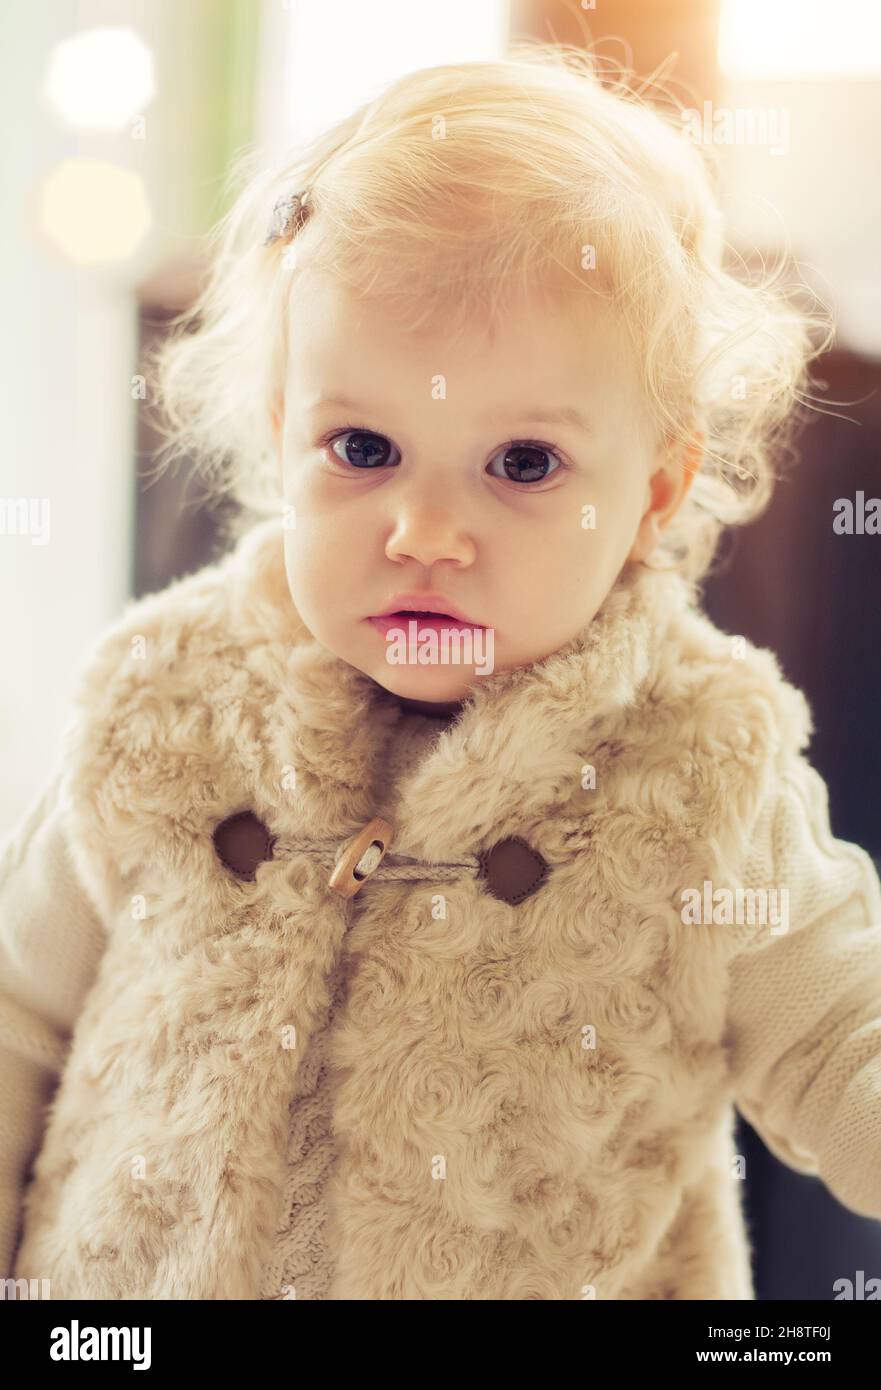 Cute baby girl posing indoors in fancy clothes Stock Photo